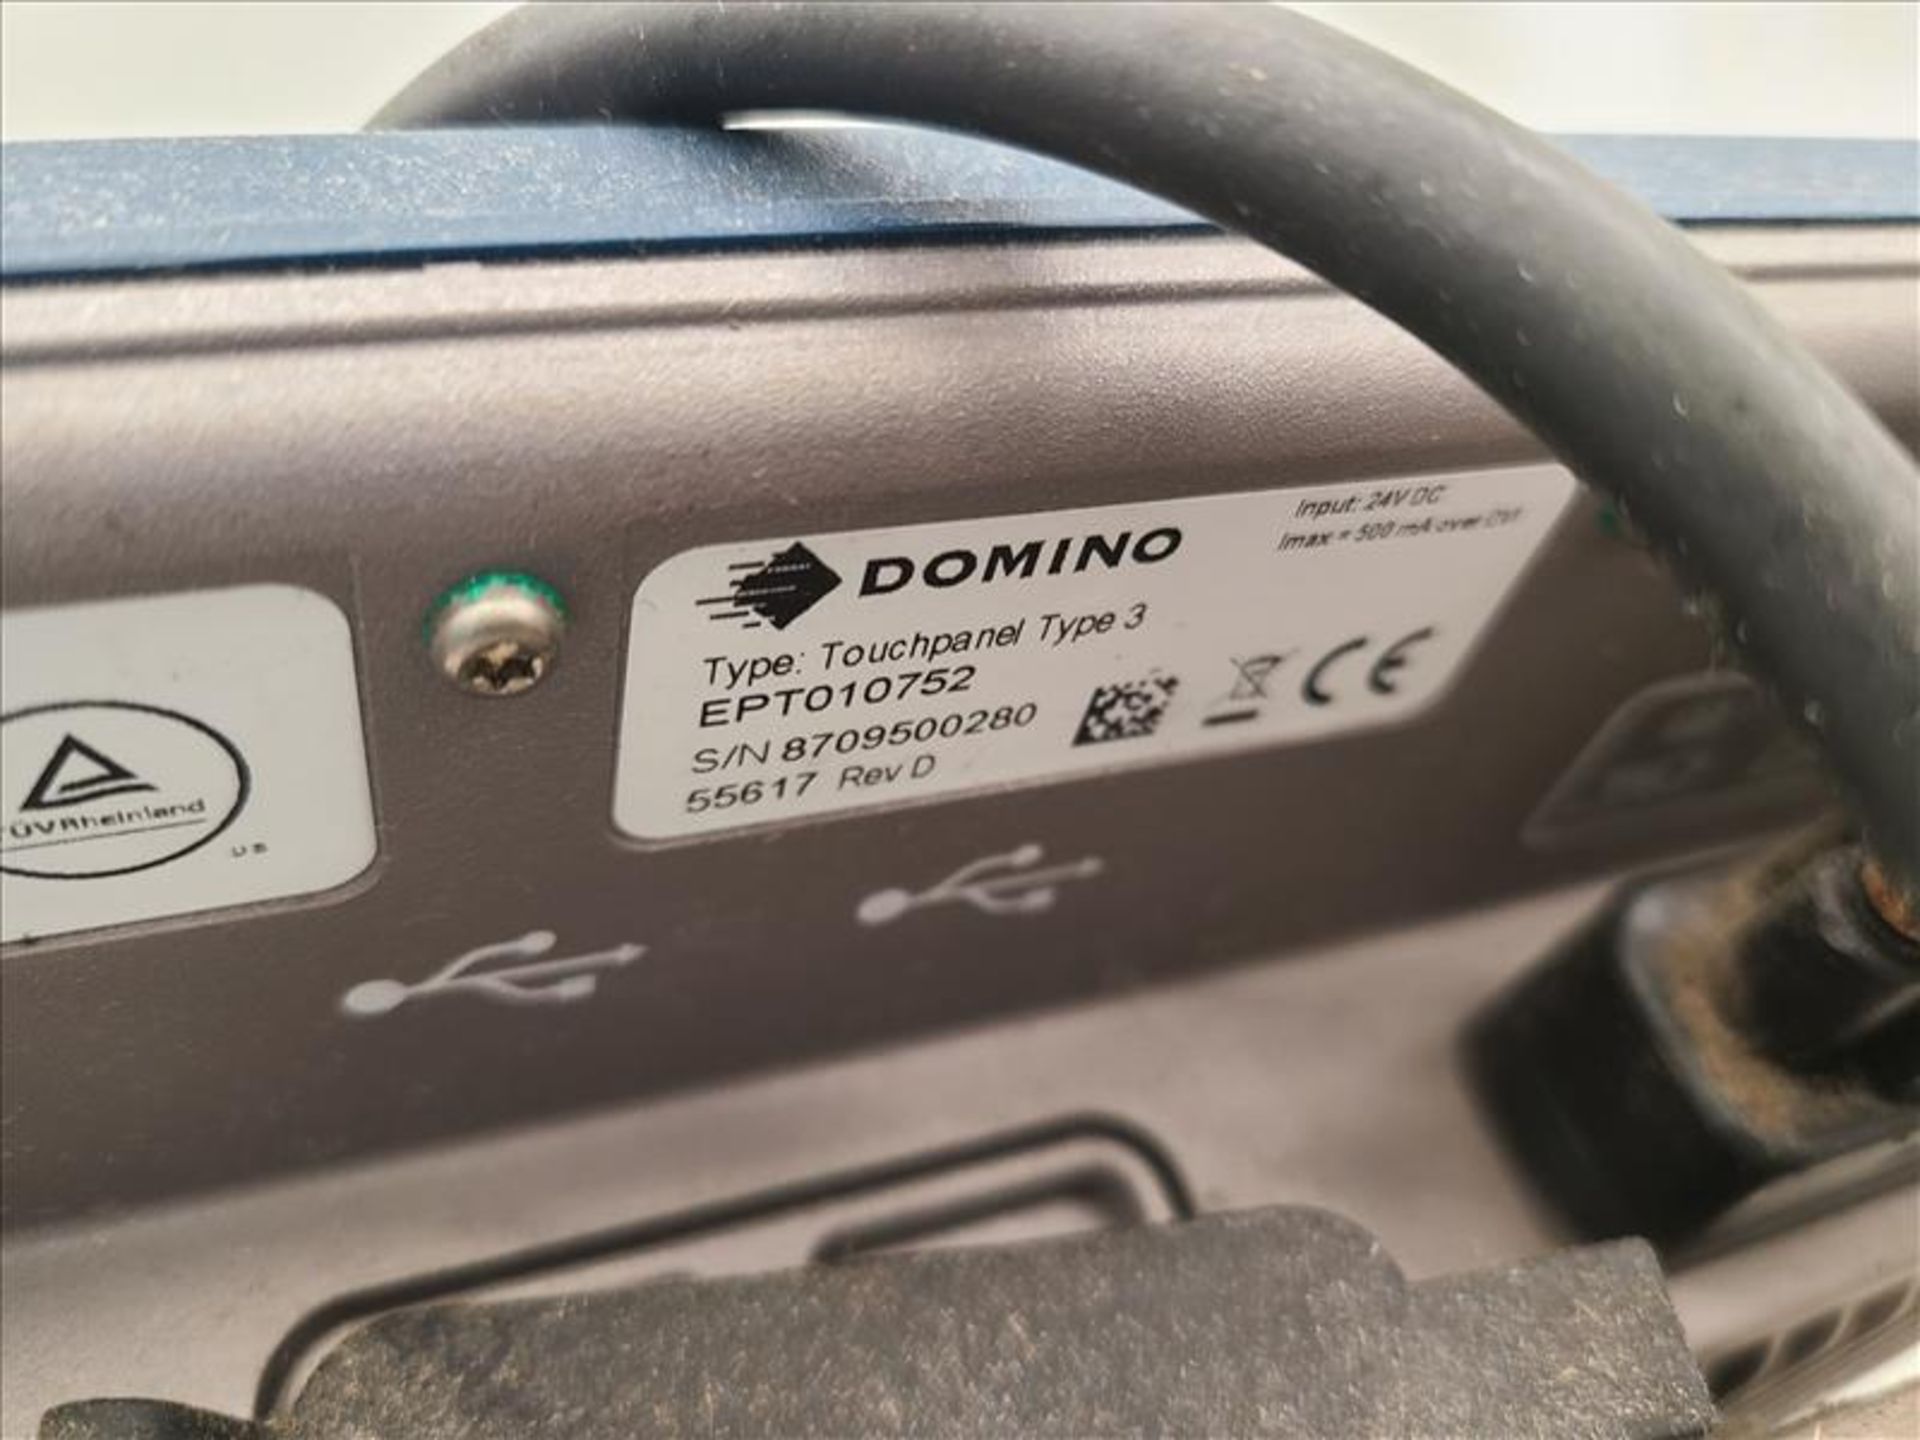 Domino Date Coder, mod. A520i, ser. no. AST000109958, 100-240 volts, 50-60 Hz, w/Domino - Image 5 of 7